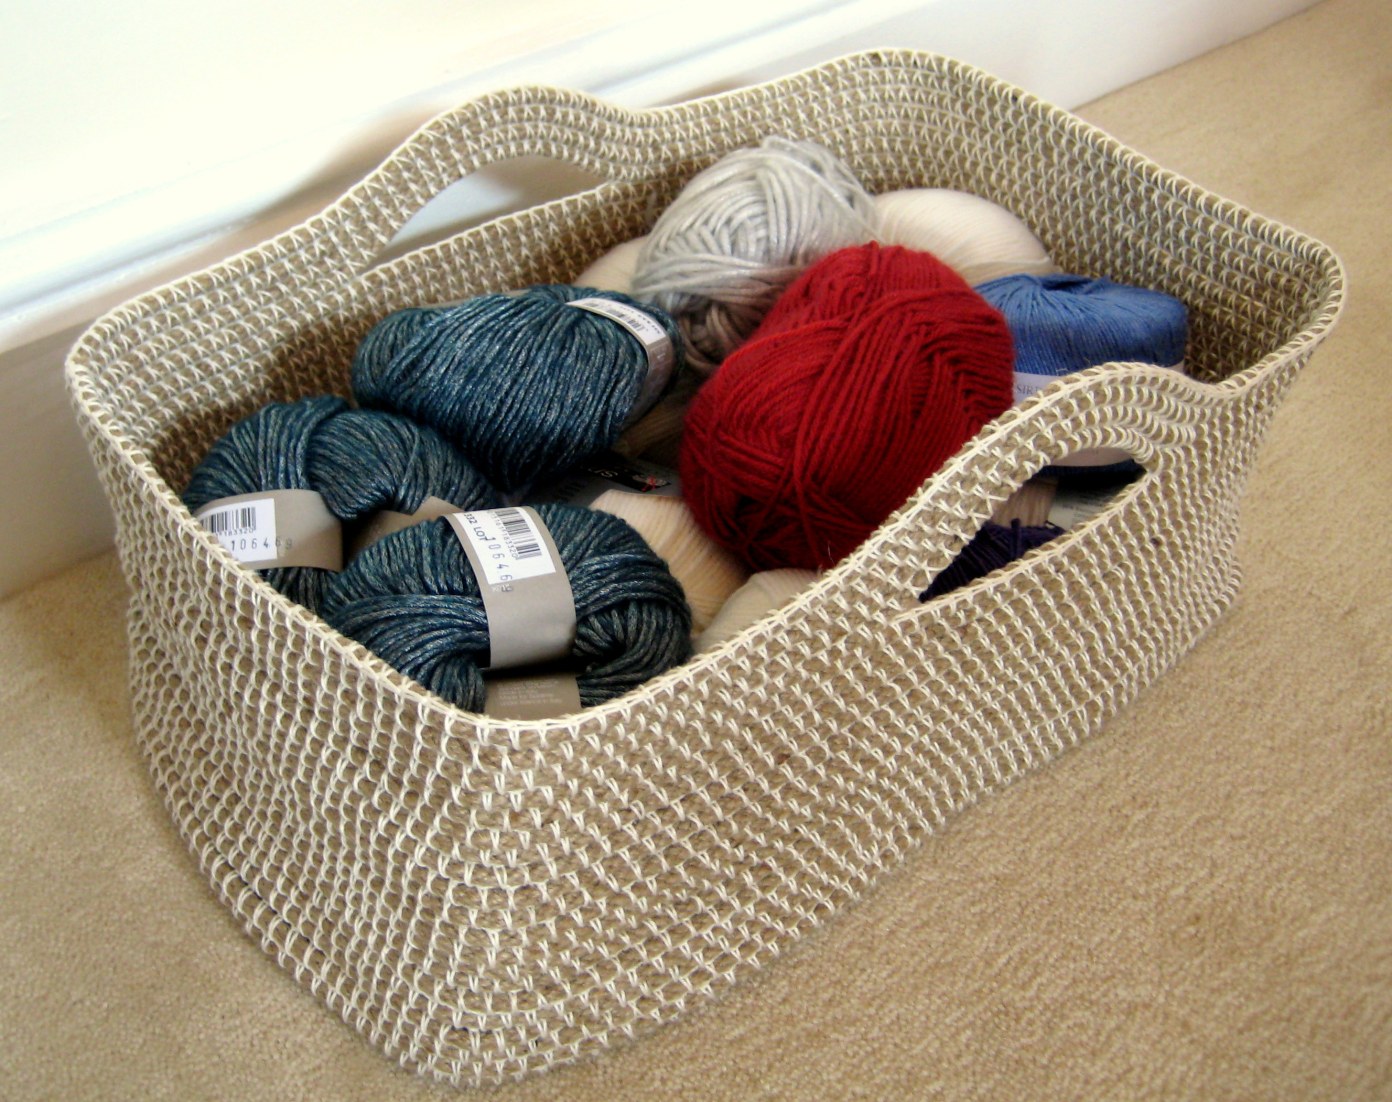 How to Make Crochet Rope Basket with Free Pattern